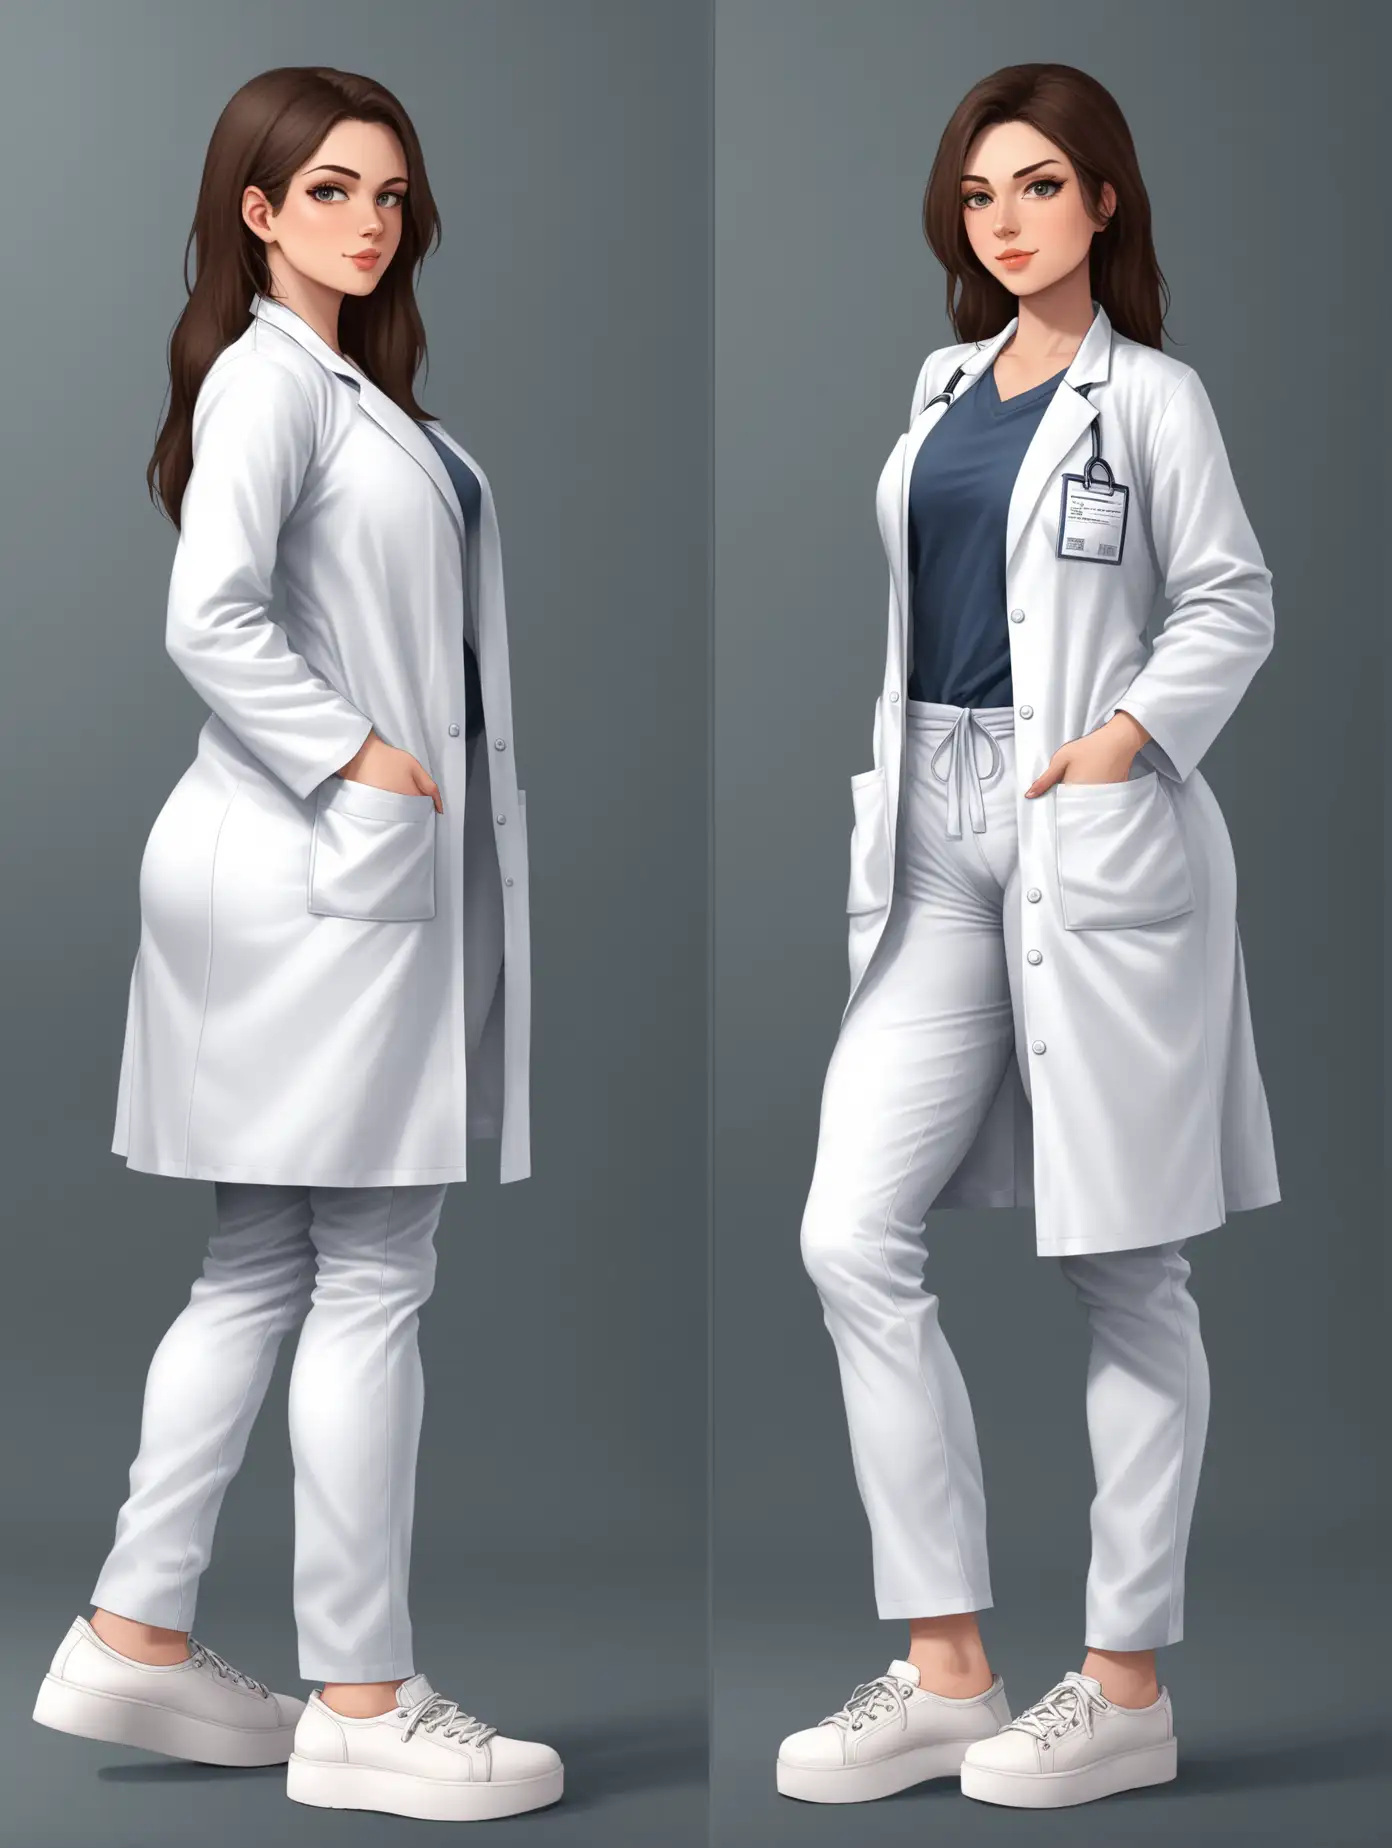 Attractive-Young-Female-Doctor-in-Stylish-Lab-Coat-and-Sneakers